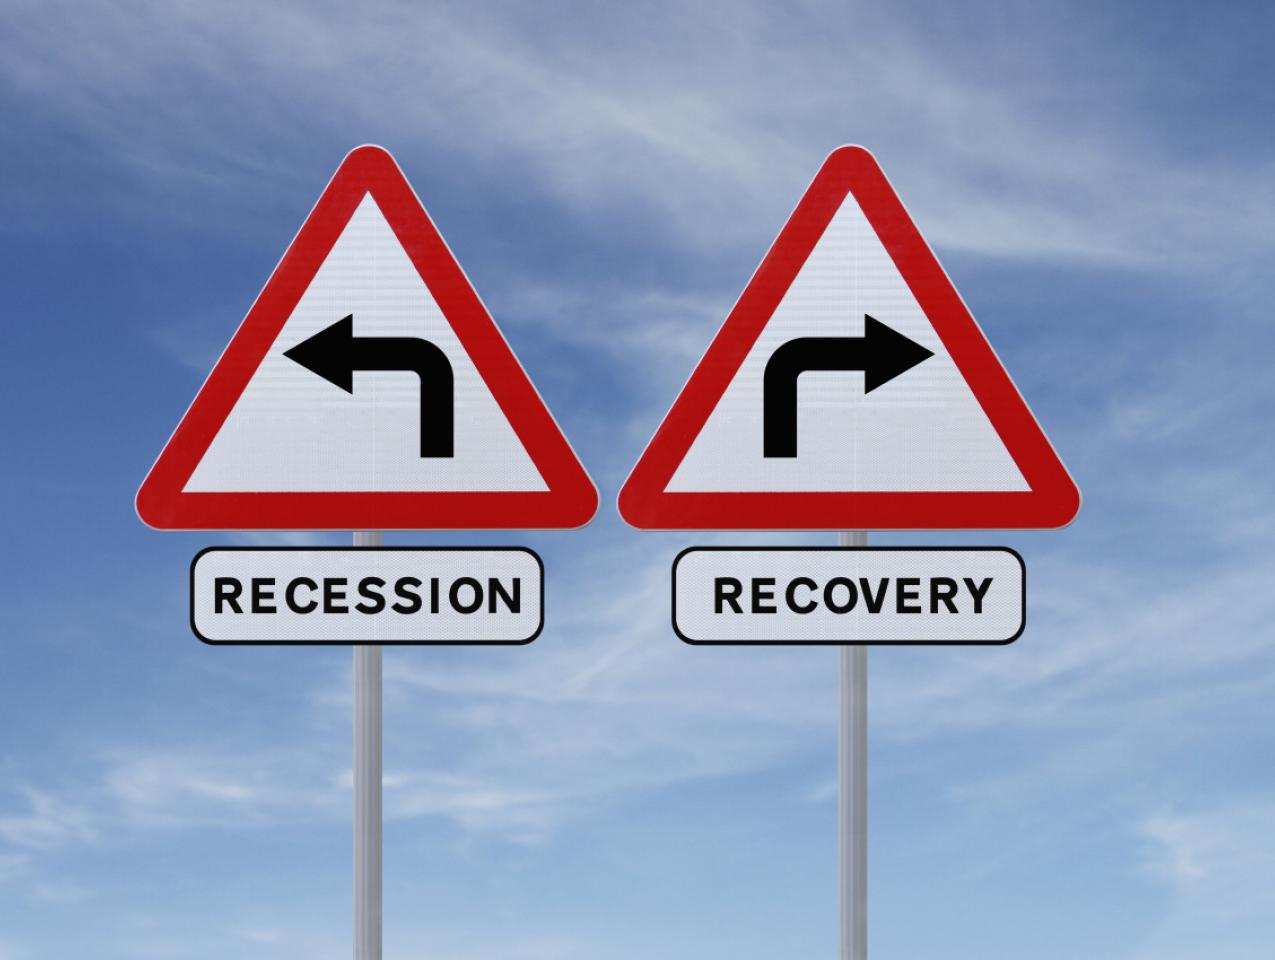 Image for  Revisiting the 2008 Financial Crisis: The Recession